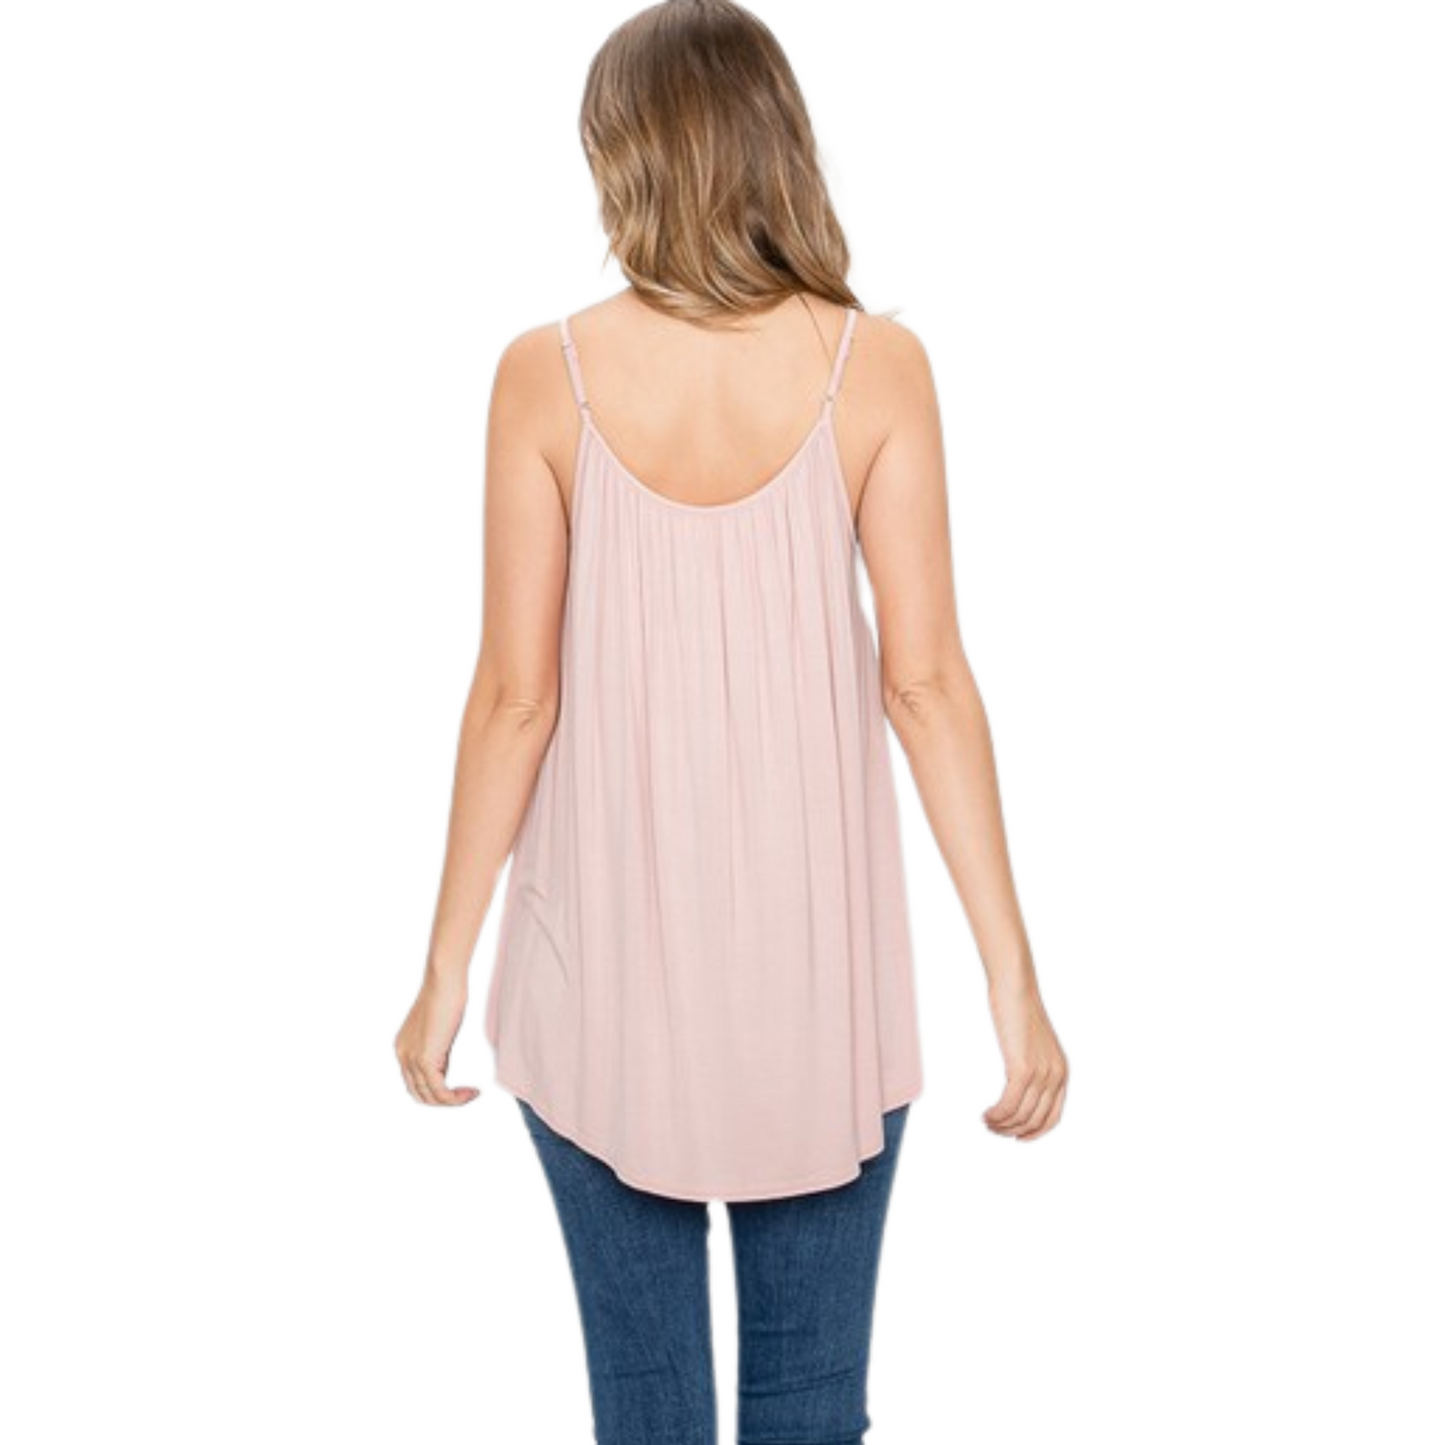 <p>This Smocked Detail Knit Cami is designed with ladder trim for a stylish look. The breathable material ensures comfort all day, available in both pink and sage color. Ideal for both formal and casual occasions.</p> <p>&nbsp;</p>